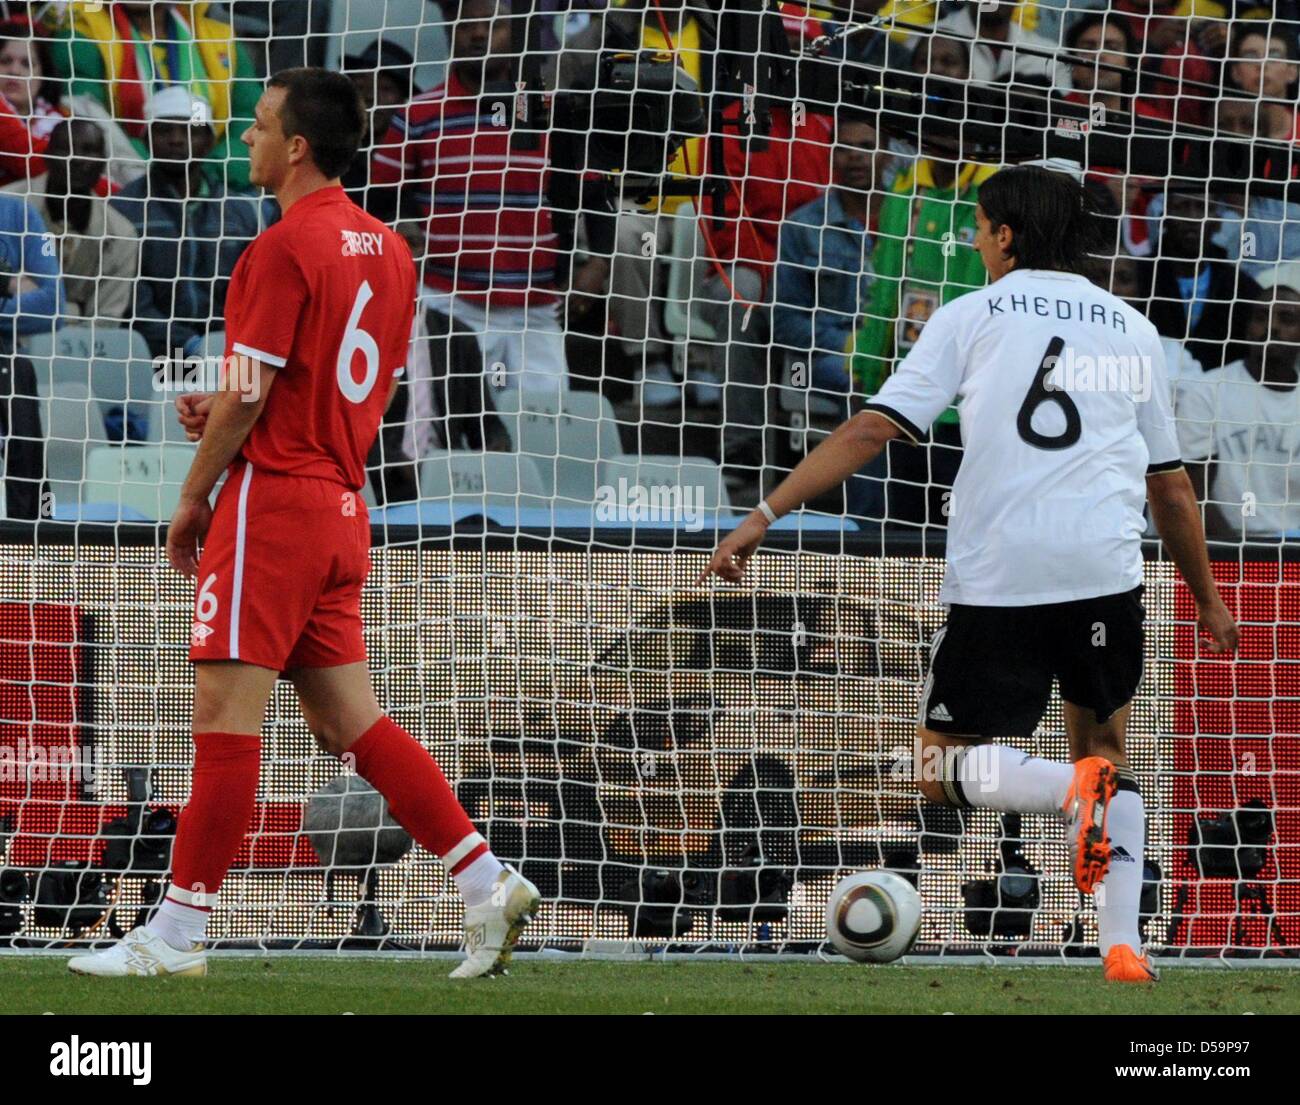 Germany's Sami Khedira celebrates next to England's John Terry during the 2010 FIFA World Cup Round of Sixteen match between Germany and England at the Free State Stadium in Bloemfontein, South Africa 27 June 2010. Photo: Marcus Brandt dpa - Please refer to http://dpaq.de/FIFA-WM2010-TC Stock Photo